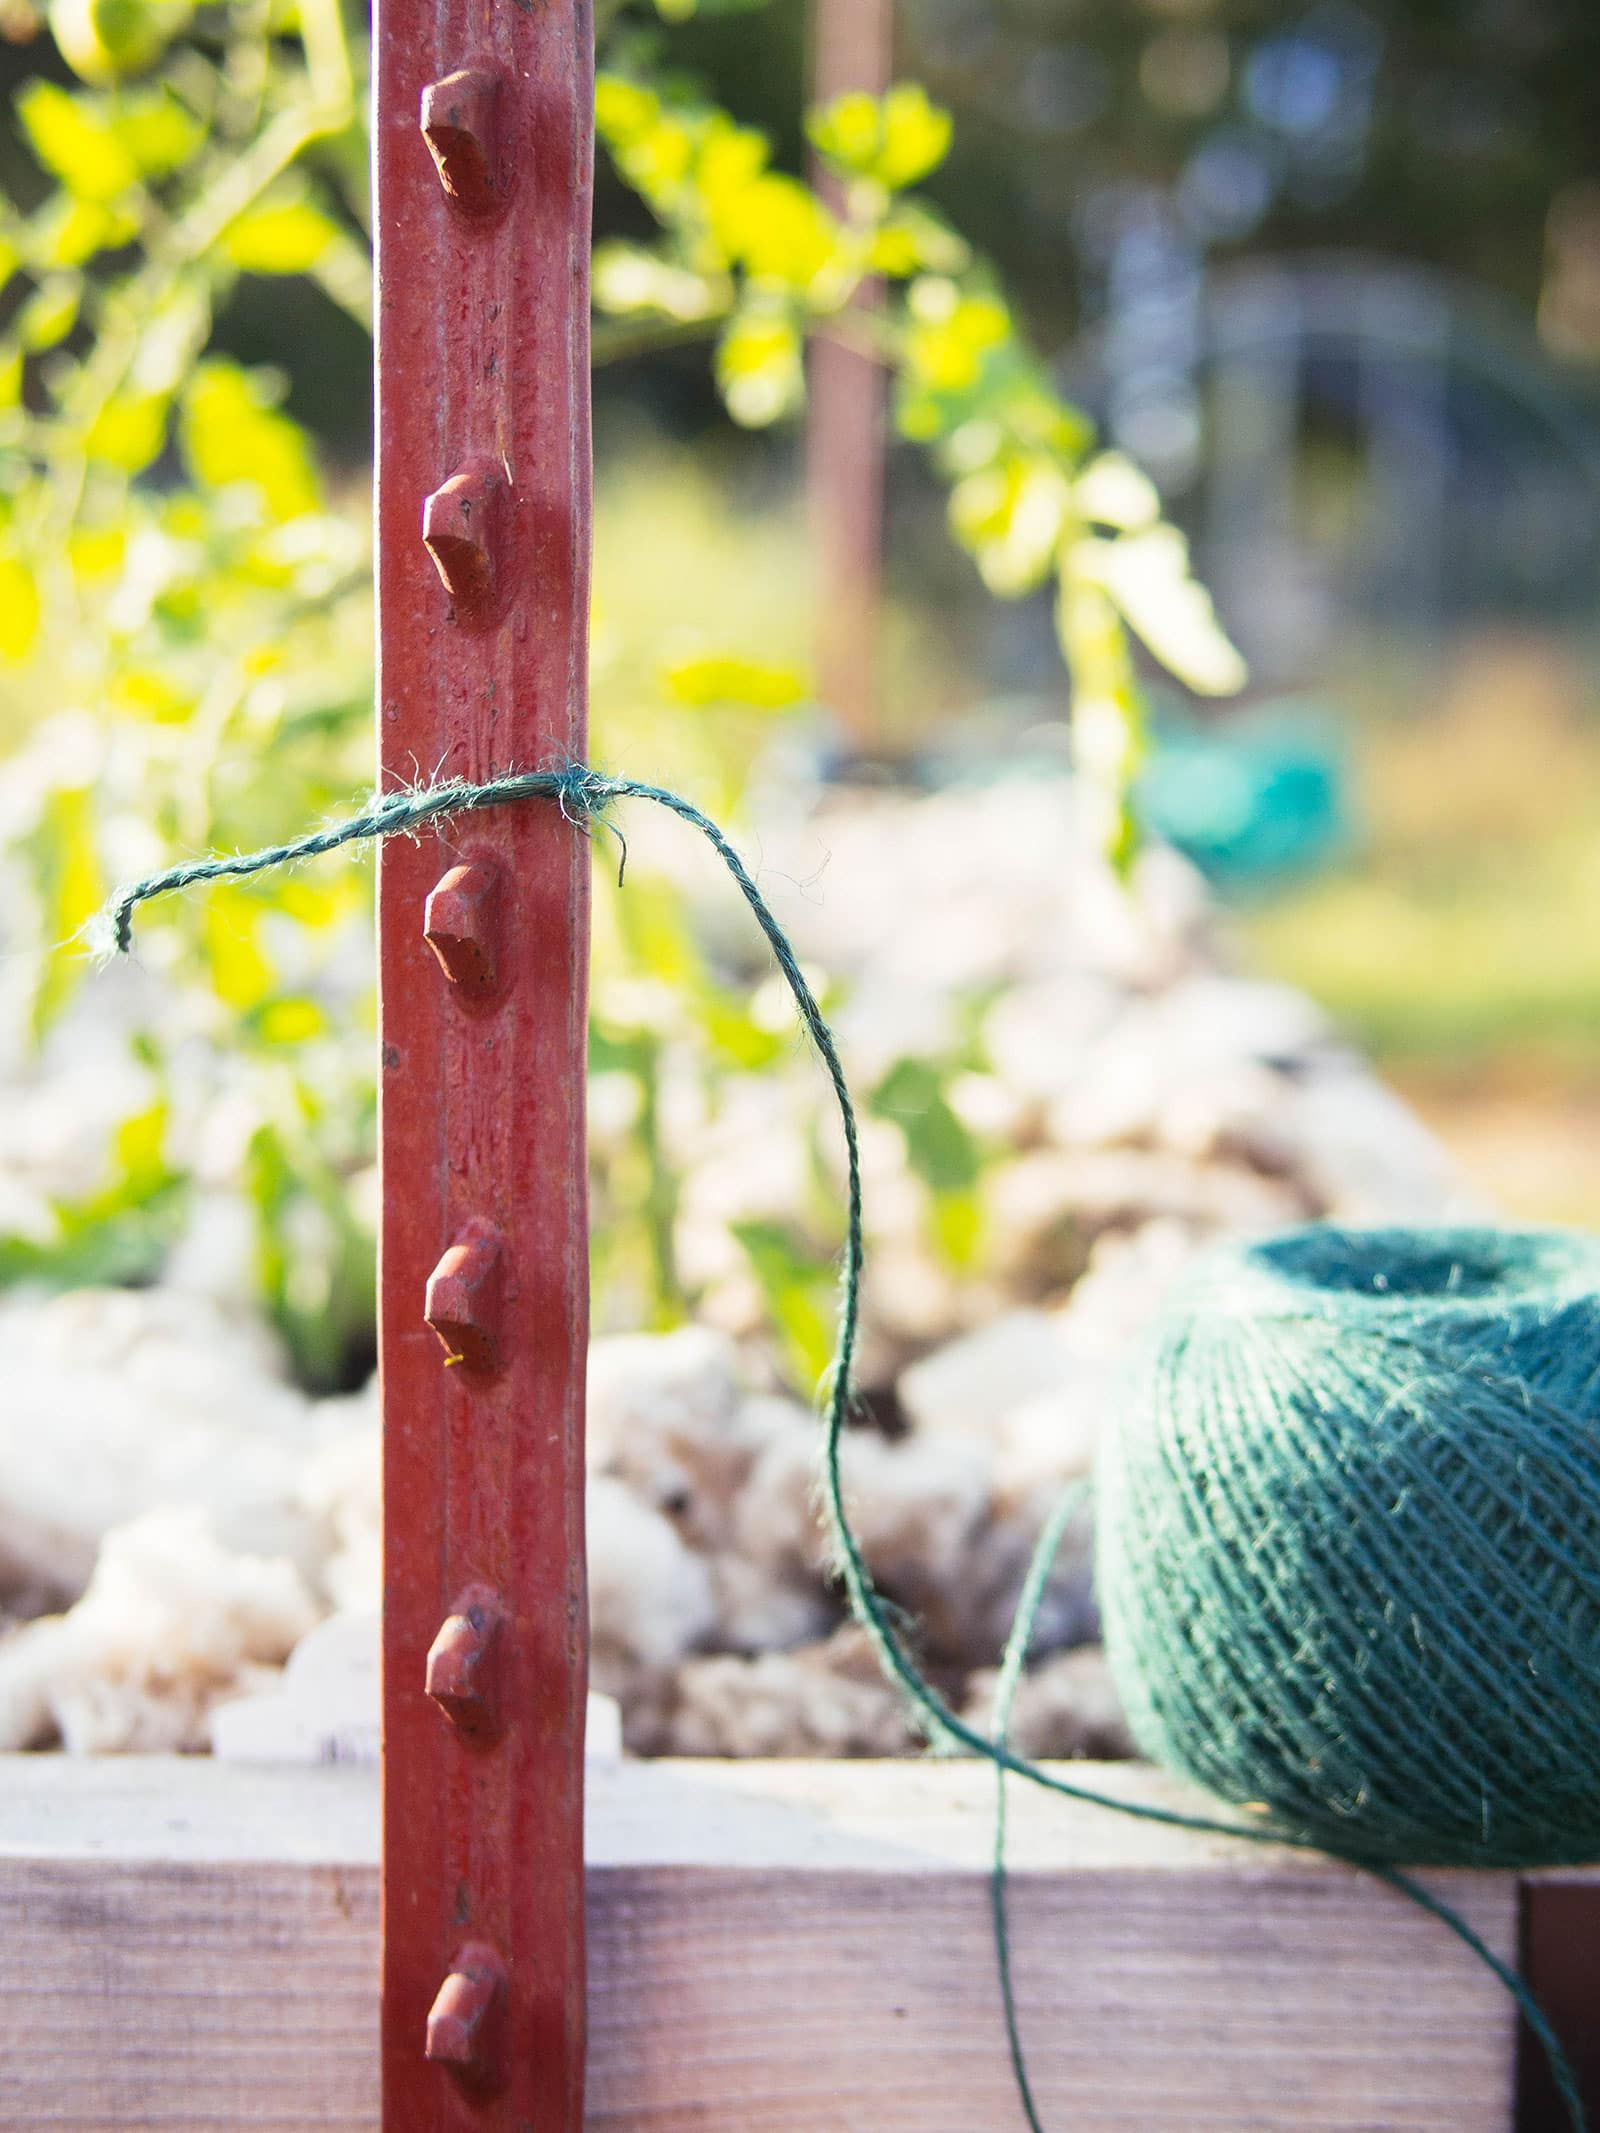 A roll of green hemp cord resting on the edge of a raised bed with a length of cord tied off to a red T-post